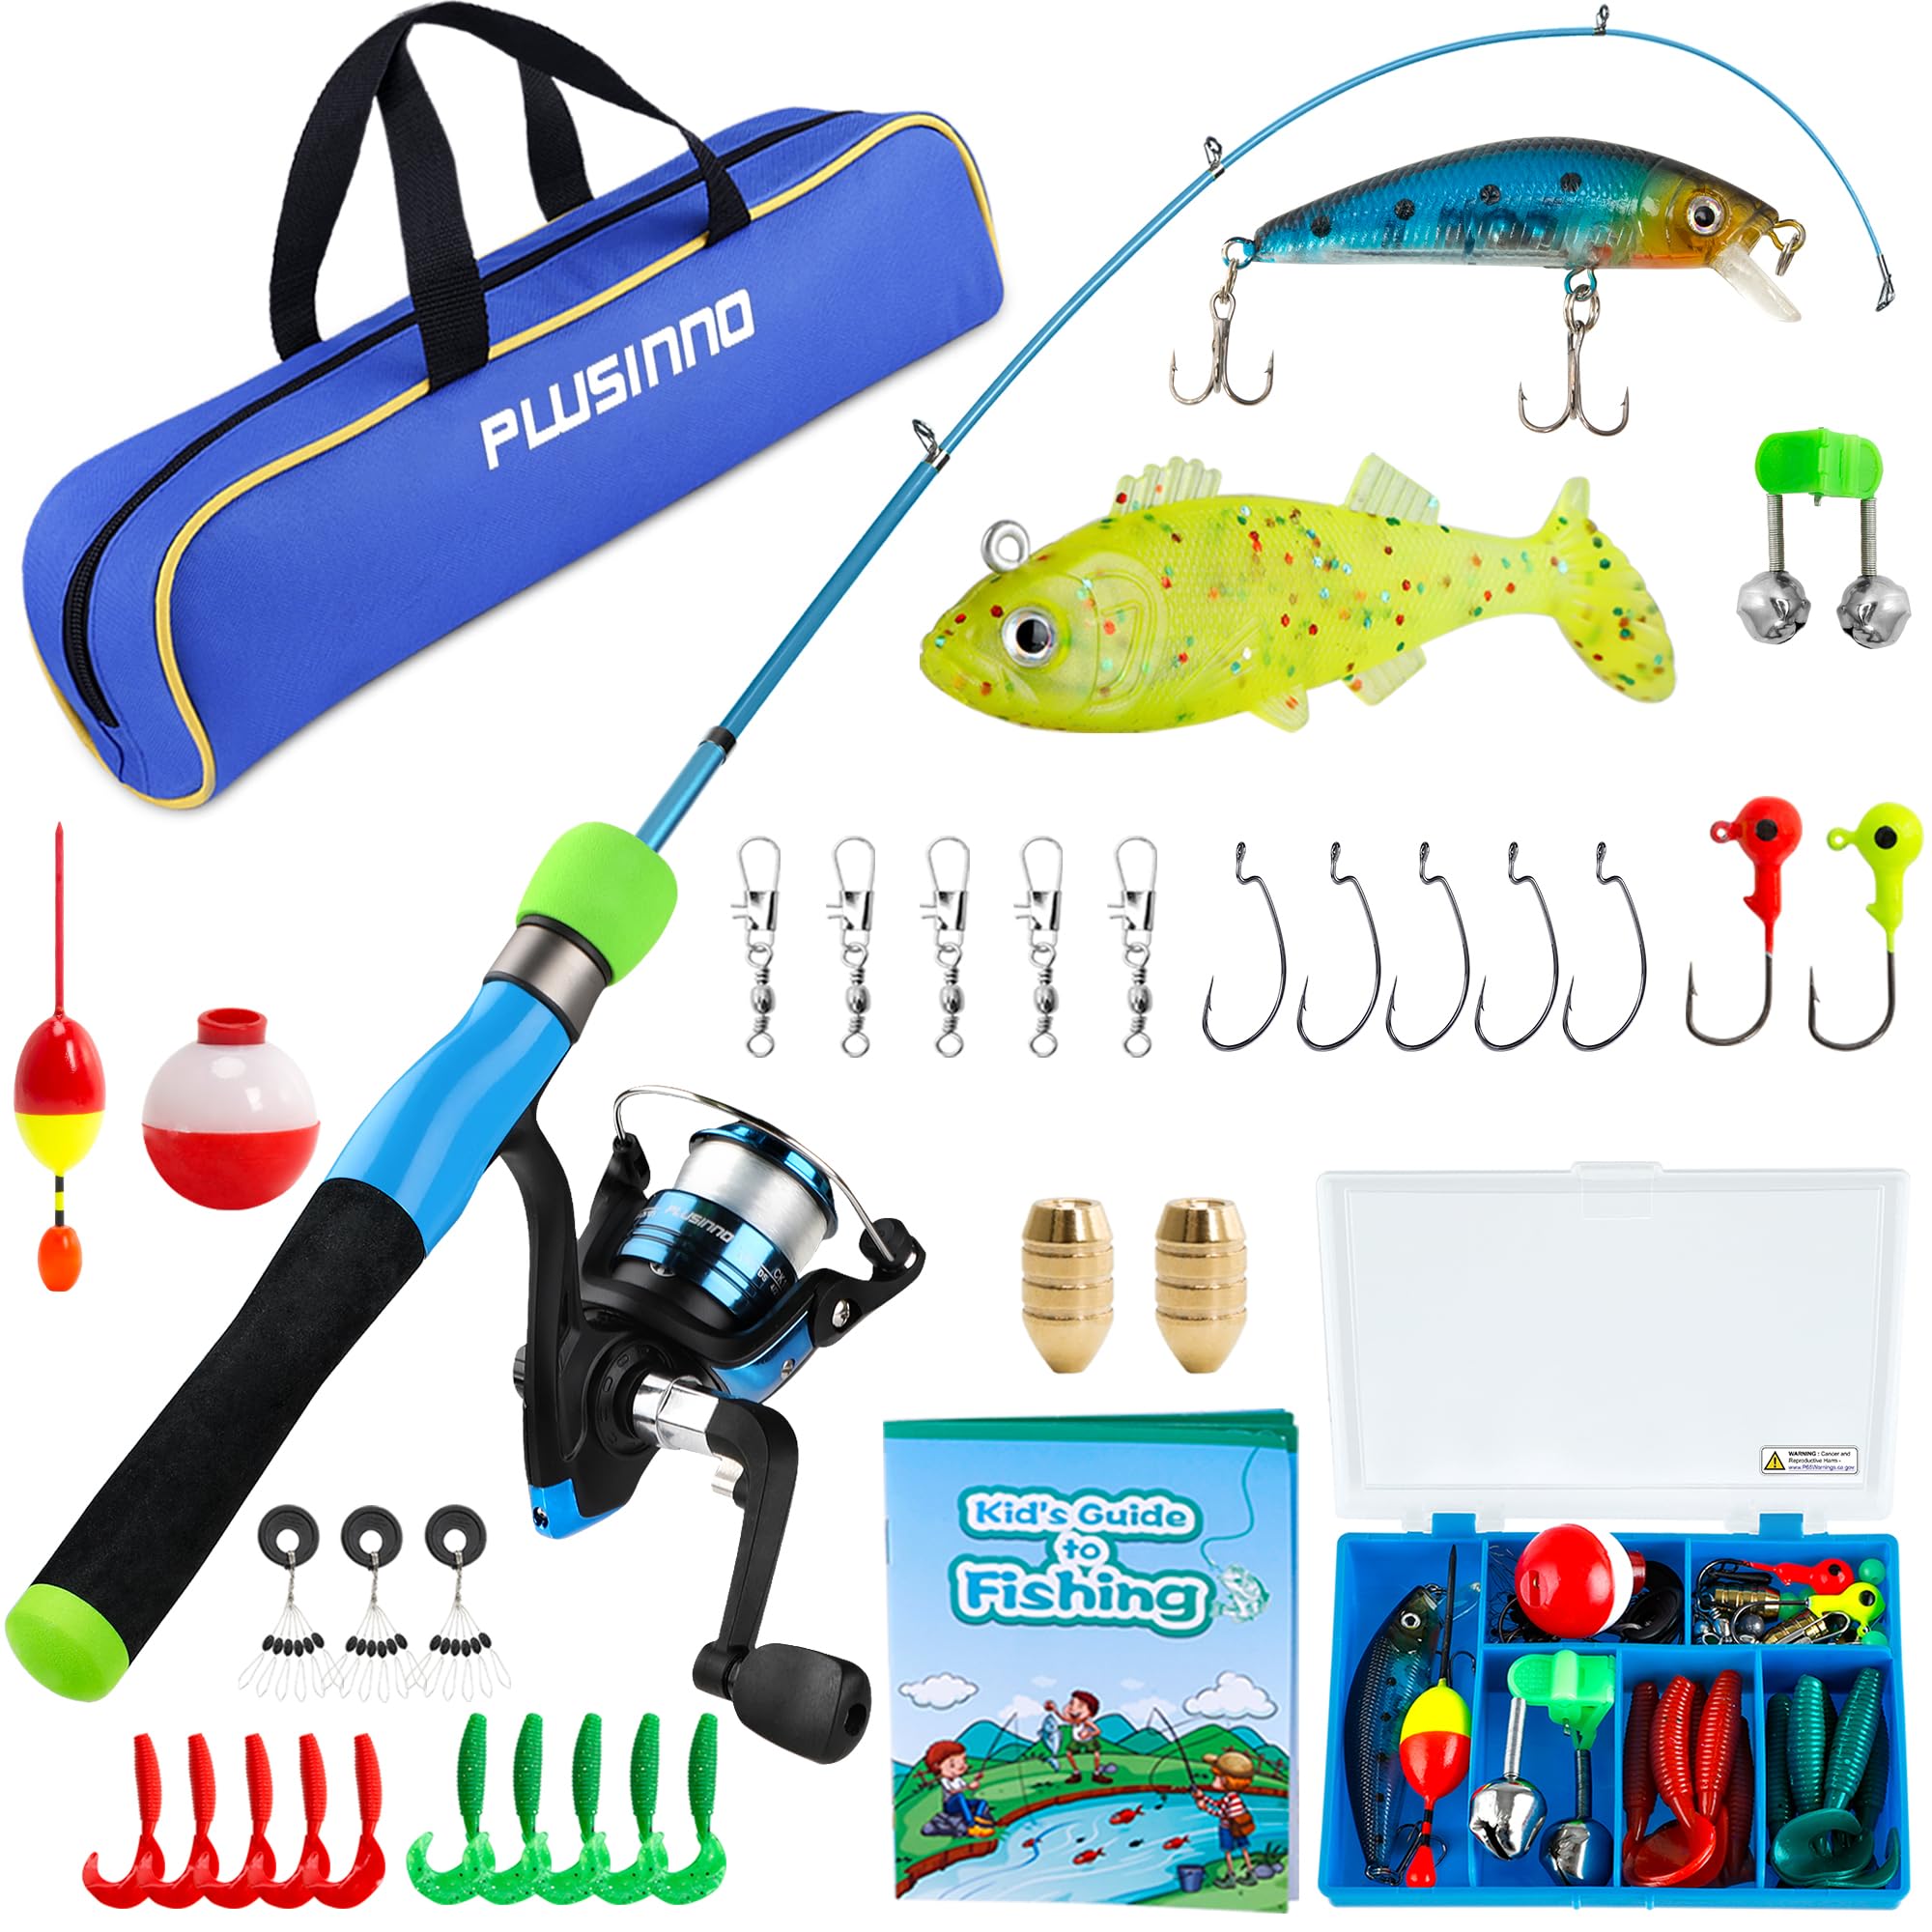 PLUSINNO Kids Fishing Pole - Kids Fishing Rod Reel Combo Starter Kit - with  Tackle Box, Practice Plug, Beginner's Guide and Trav